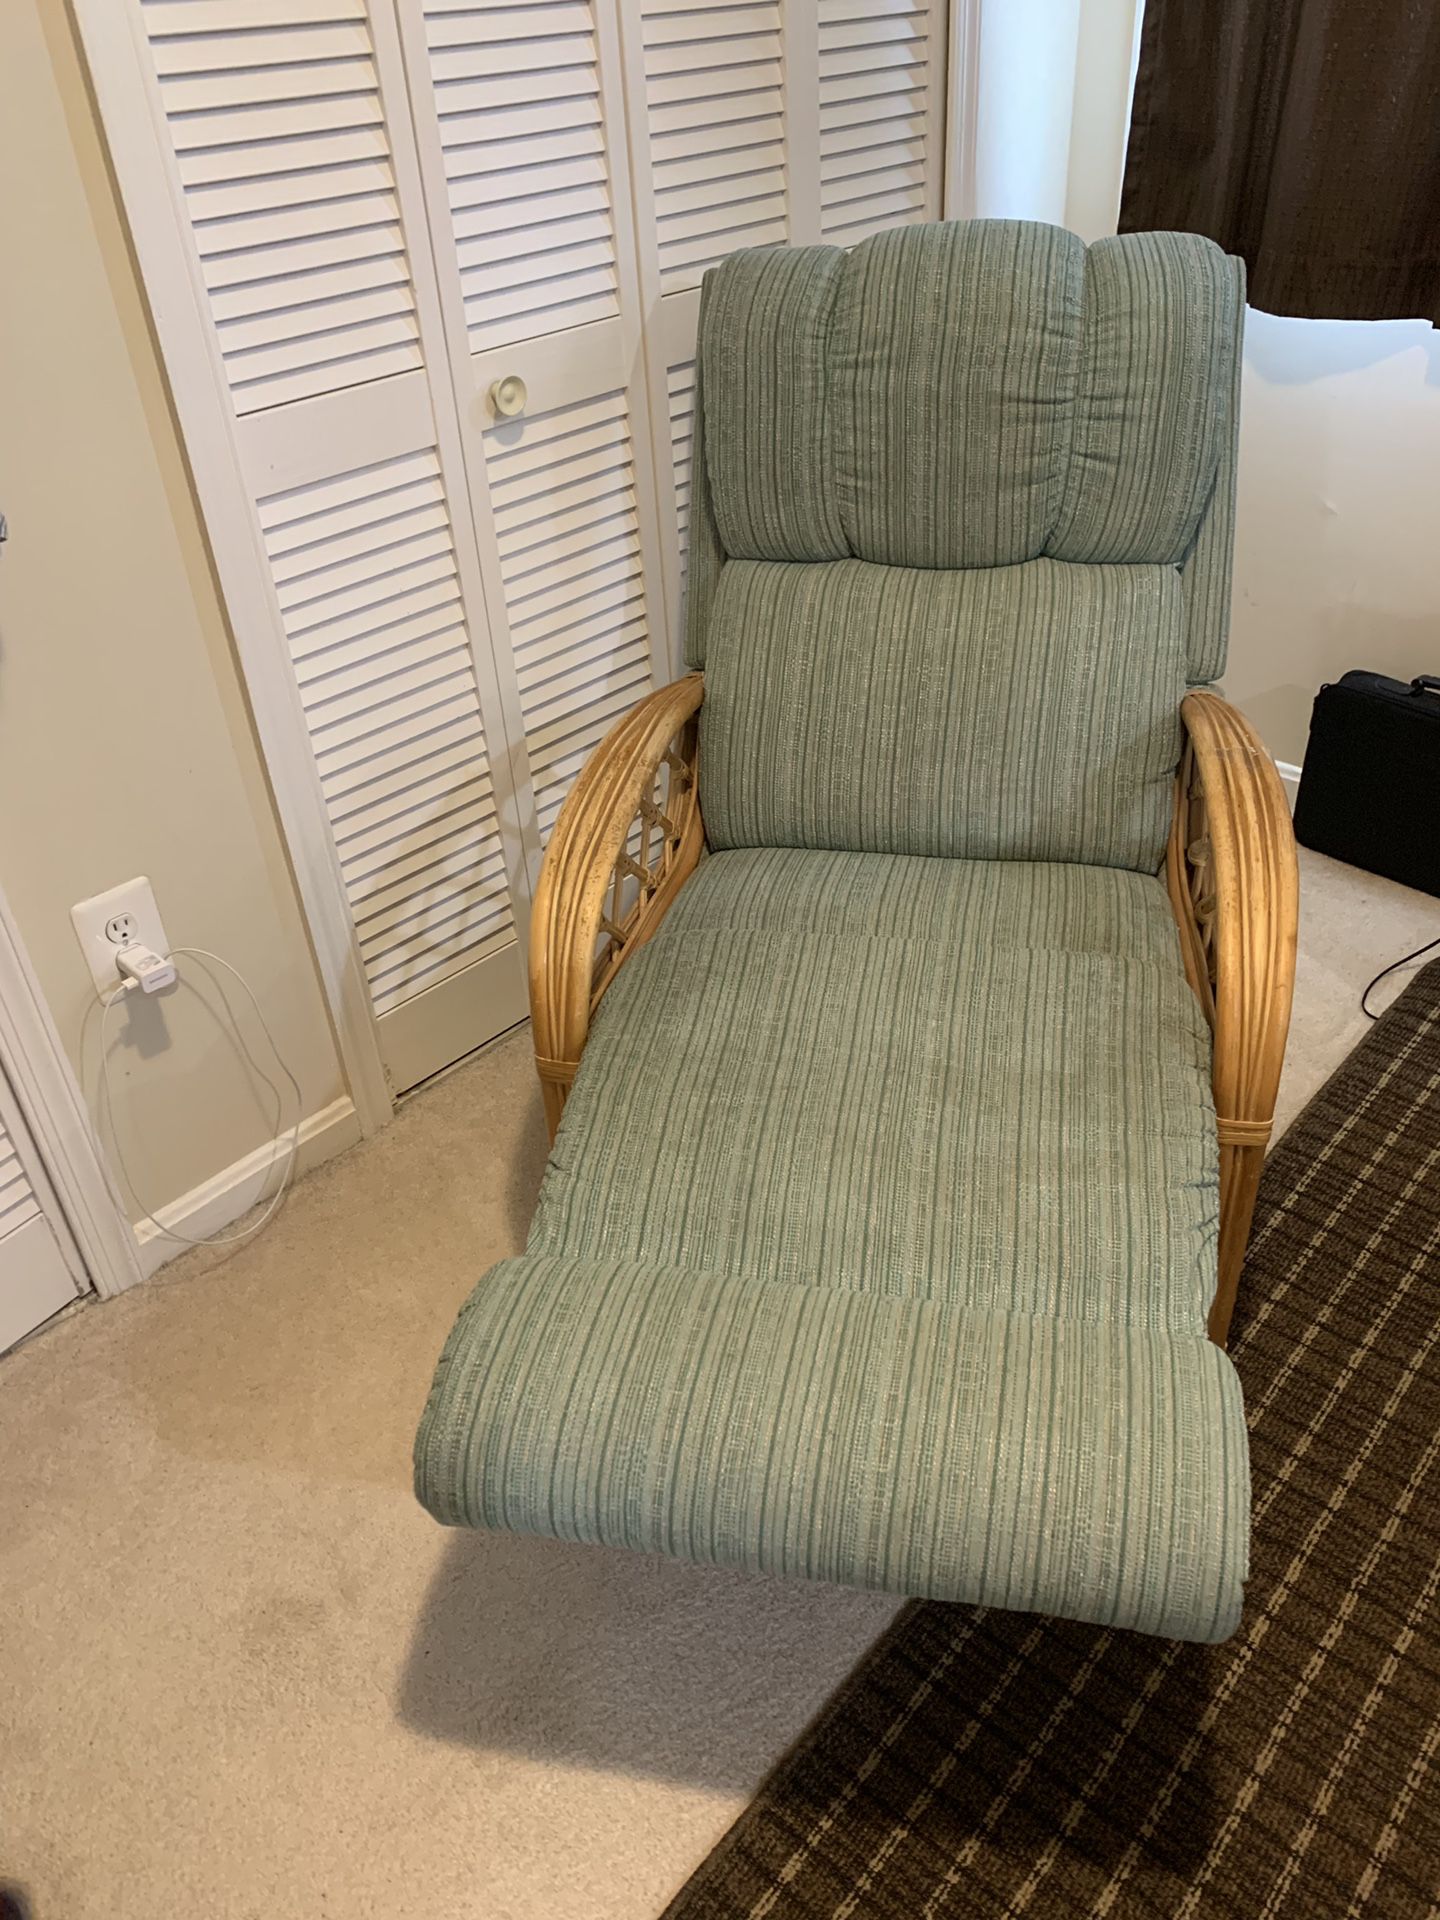 Green Recliner Chair for watching TV or for Bedroom in very good condition.